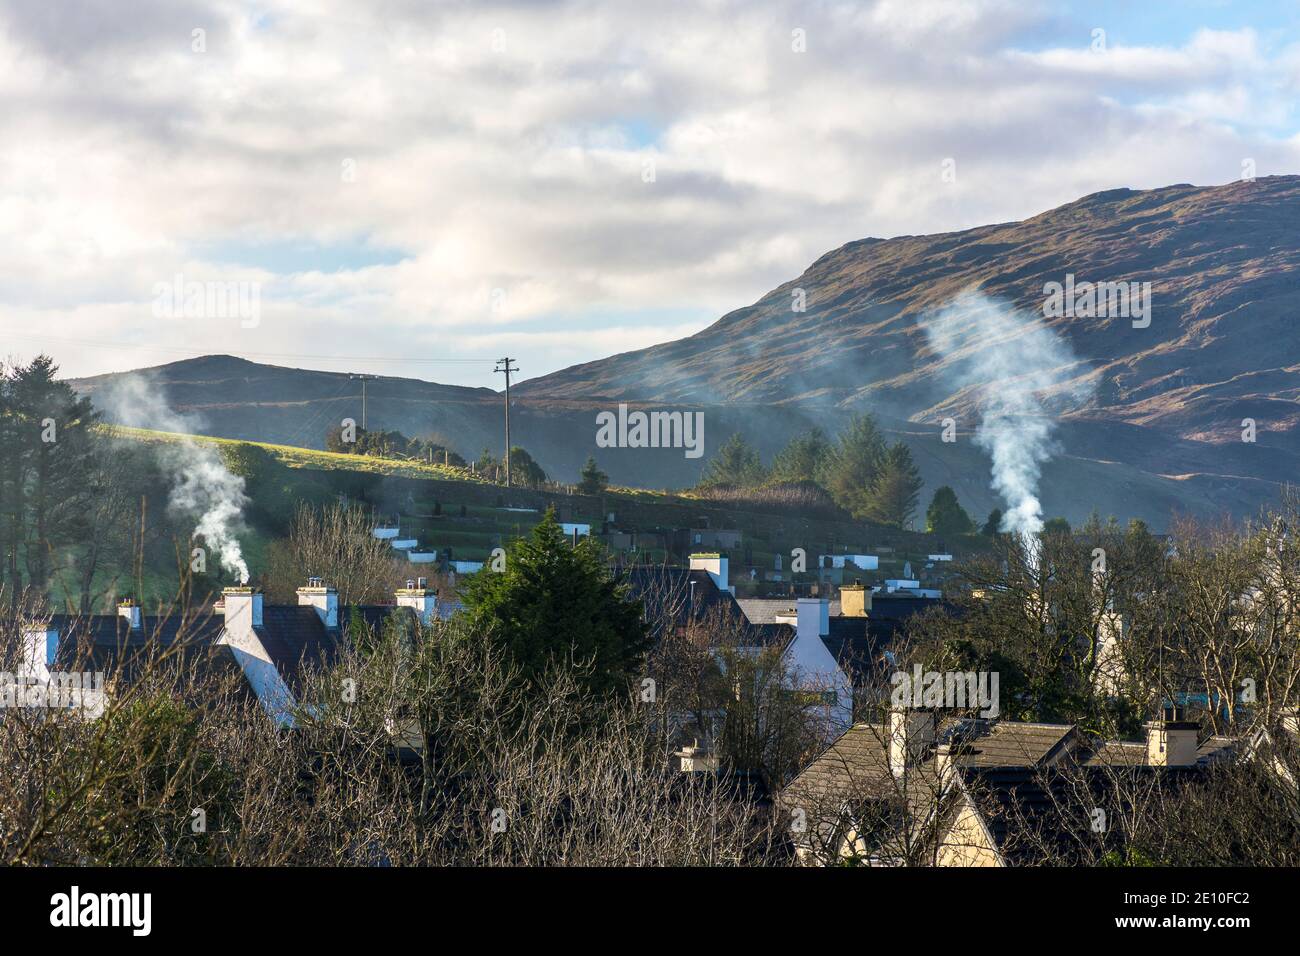 Homes burning coal, turf or wood for heating in rural Ireland. Ardara, County Donegal. Stock Photo